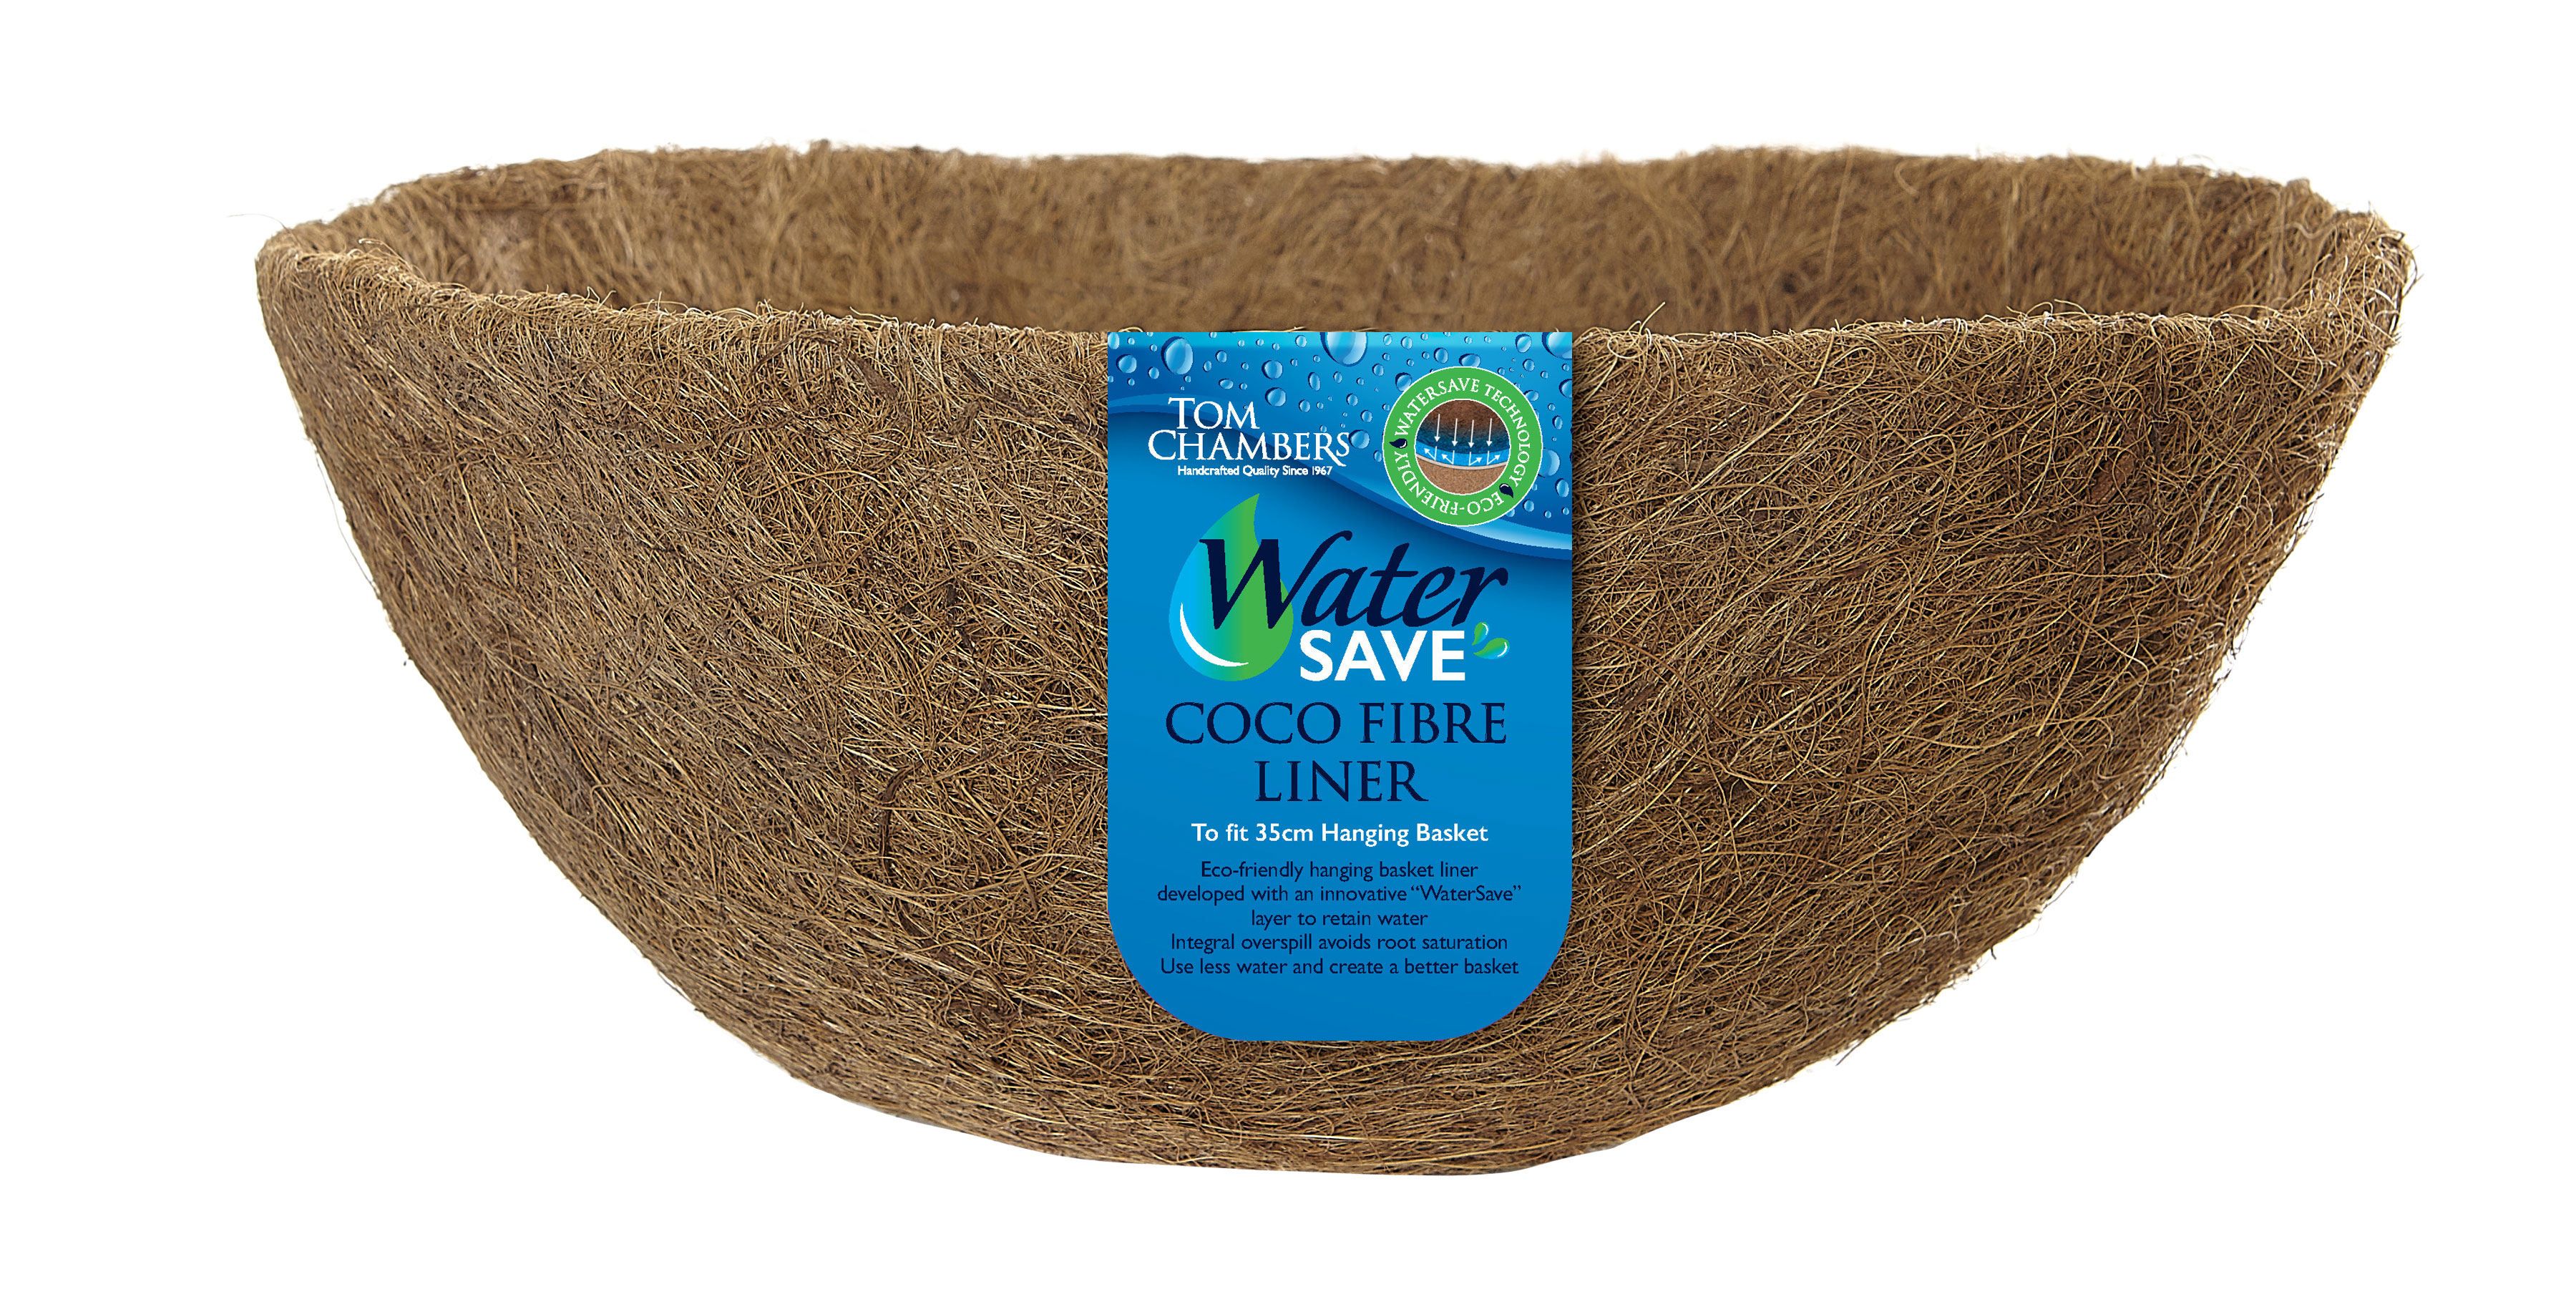 Coco Fibre Liner Water Save For 35cm Tom Chambers Hanging Basket